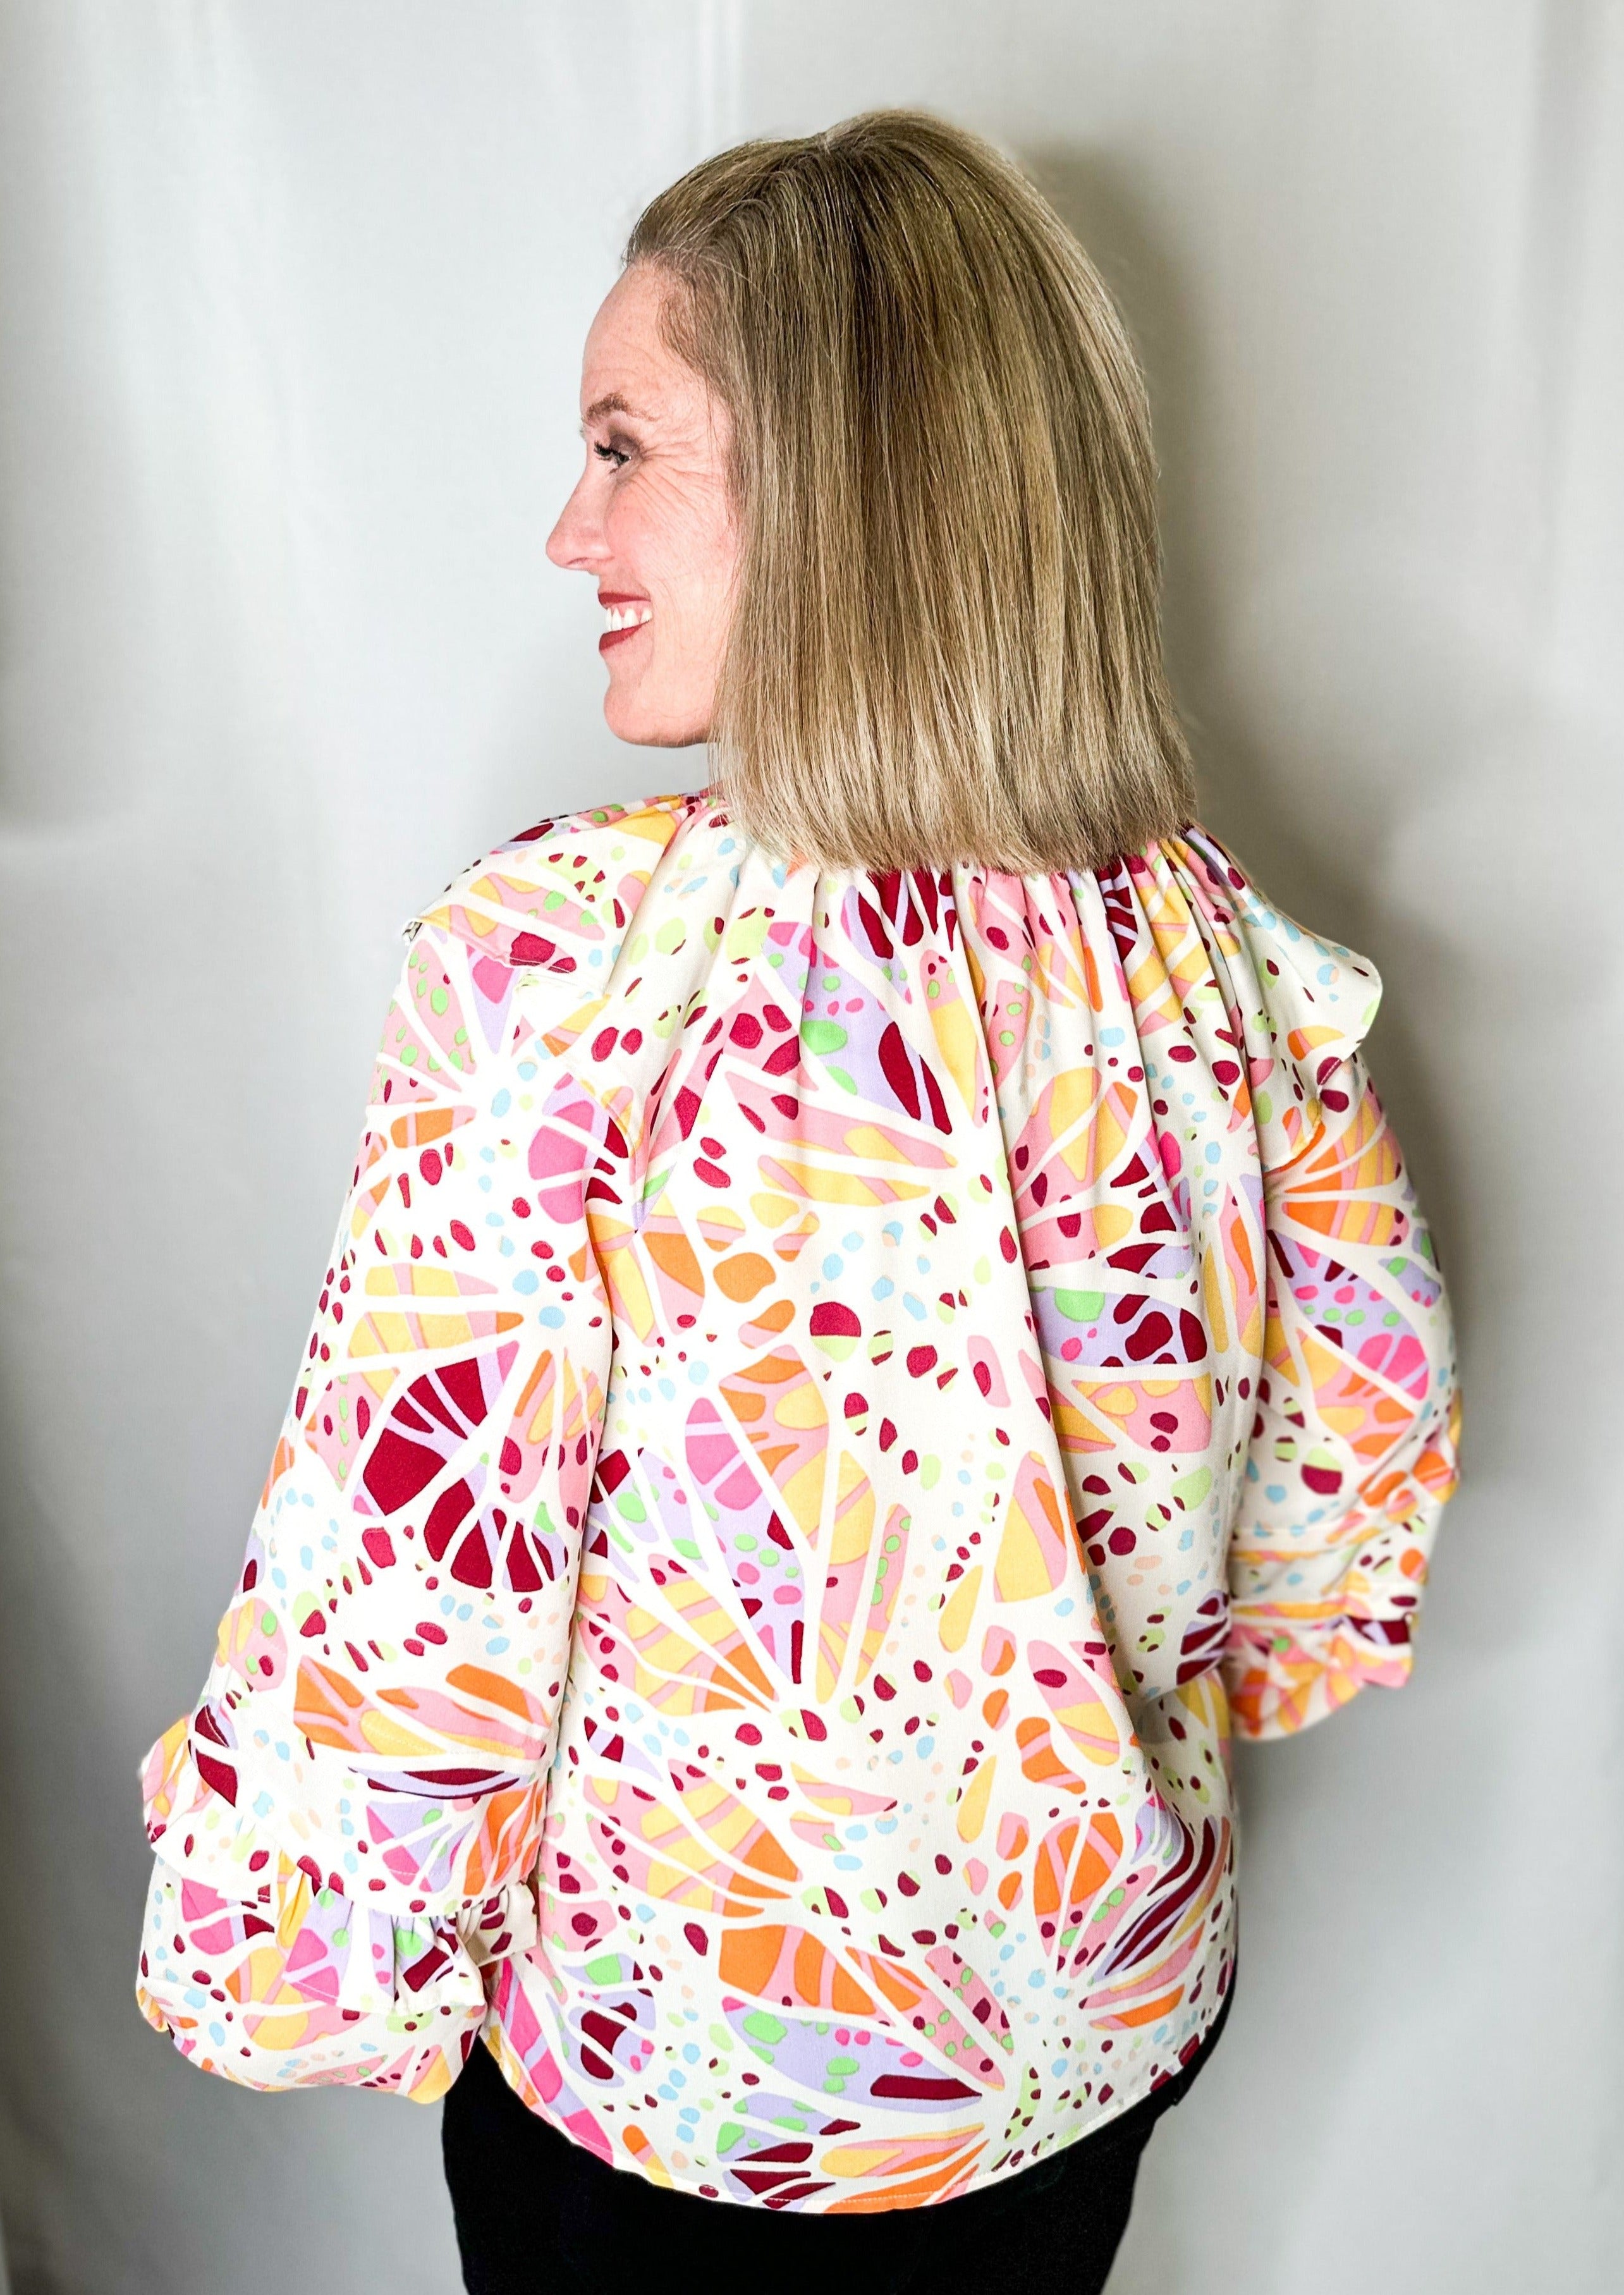 Back view of blouse. White long sleeve blouse with ruffle detail at the top of the sleeve near the shoulder and another small ruffle 3/4 down the sleeve. It has a higher neckline and multicolored abstract print all over.